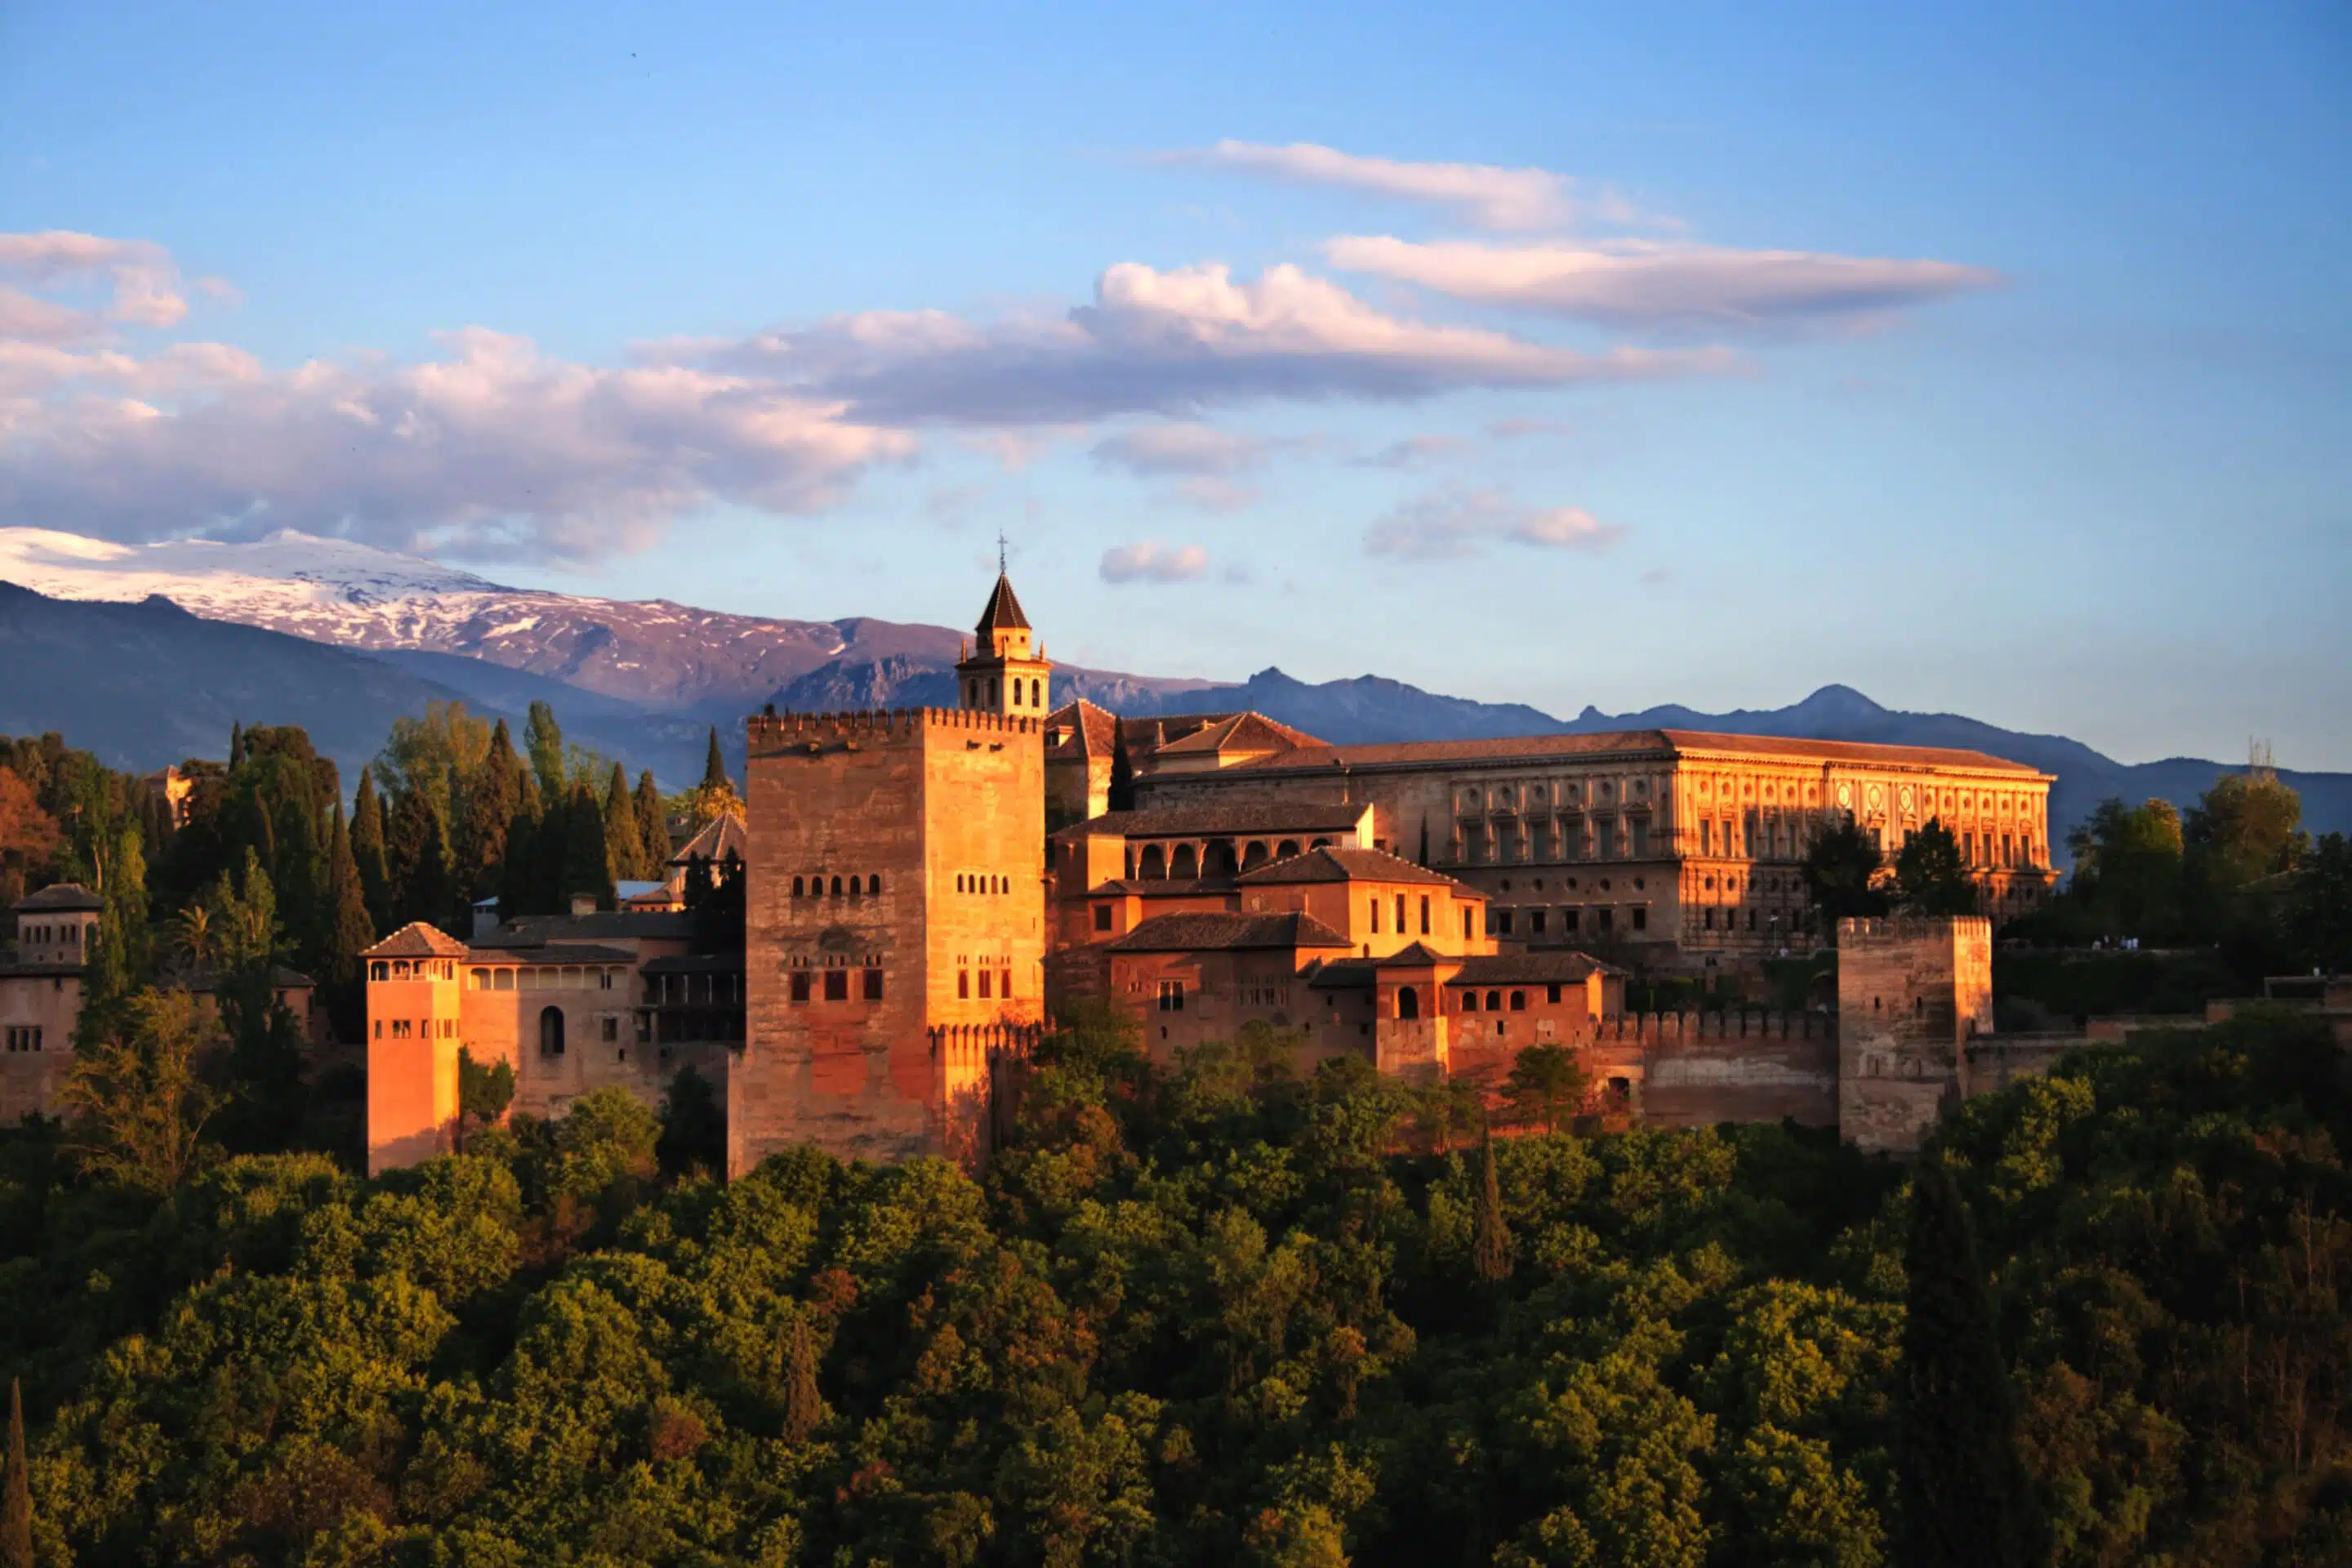 Alhambra in Granada at twilight. One the 7 New Wonders